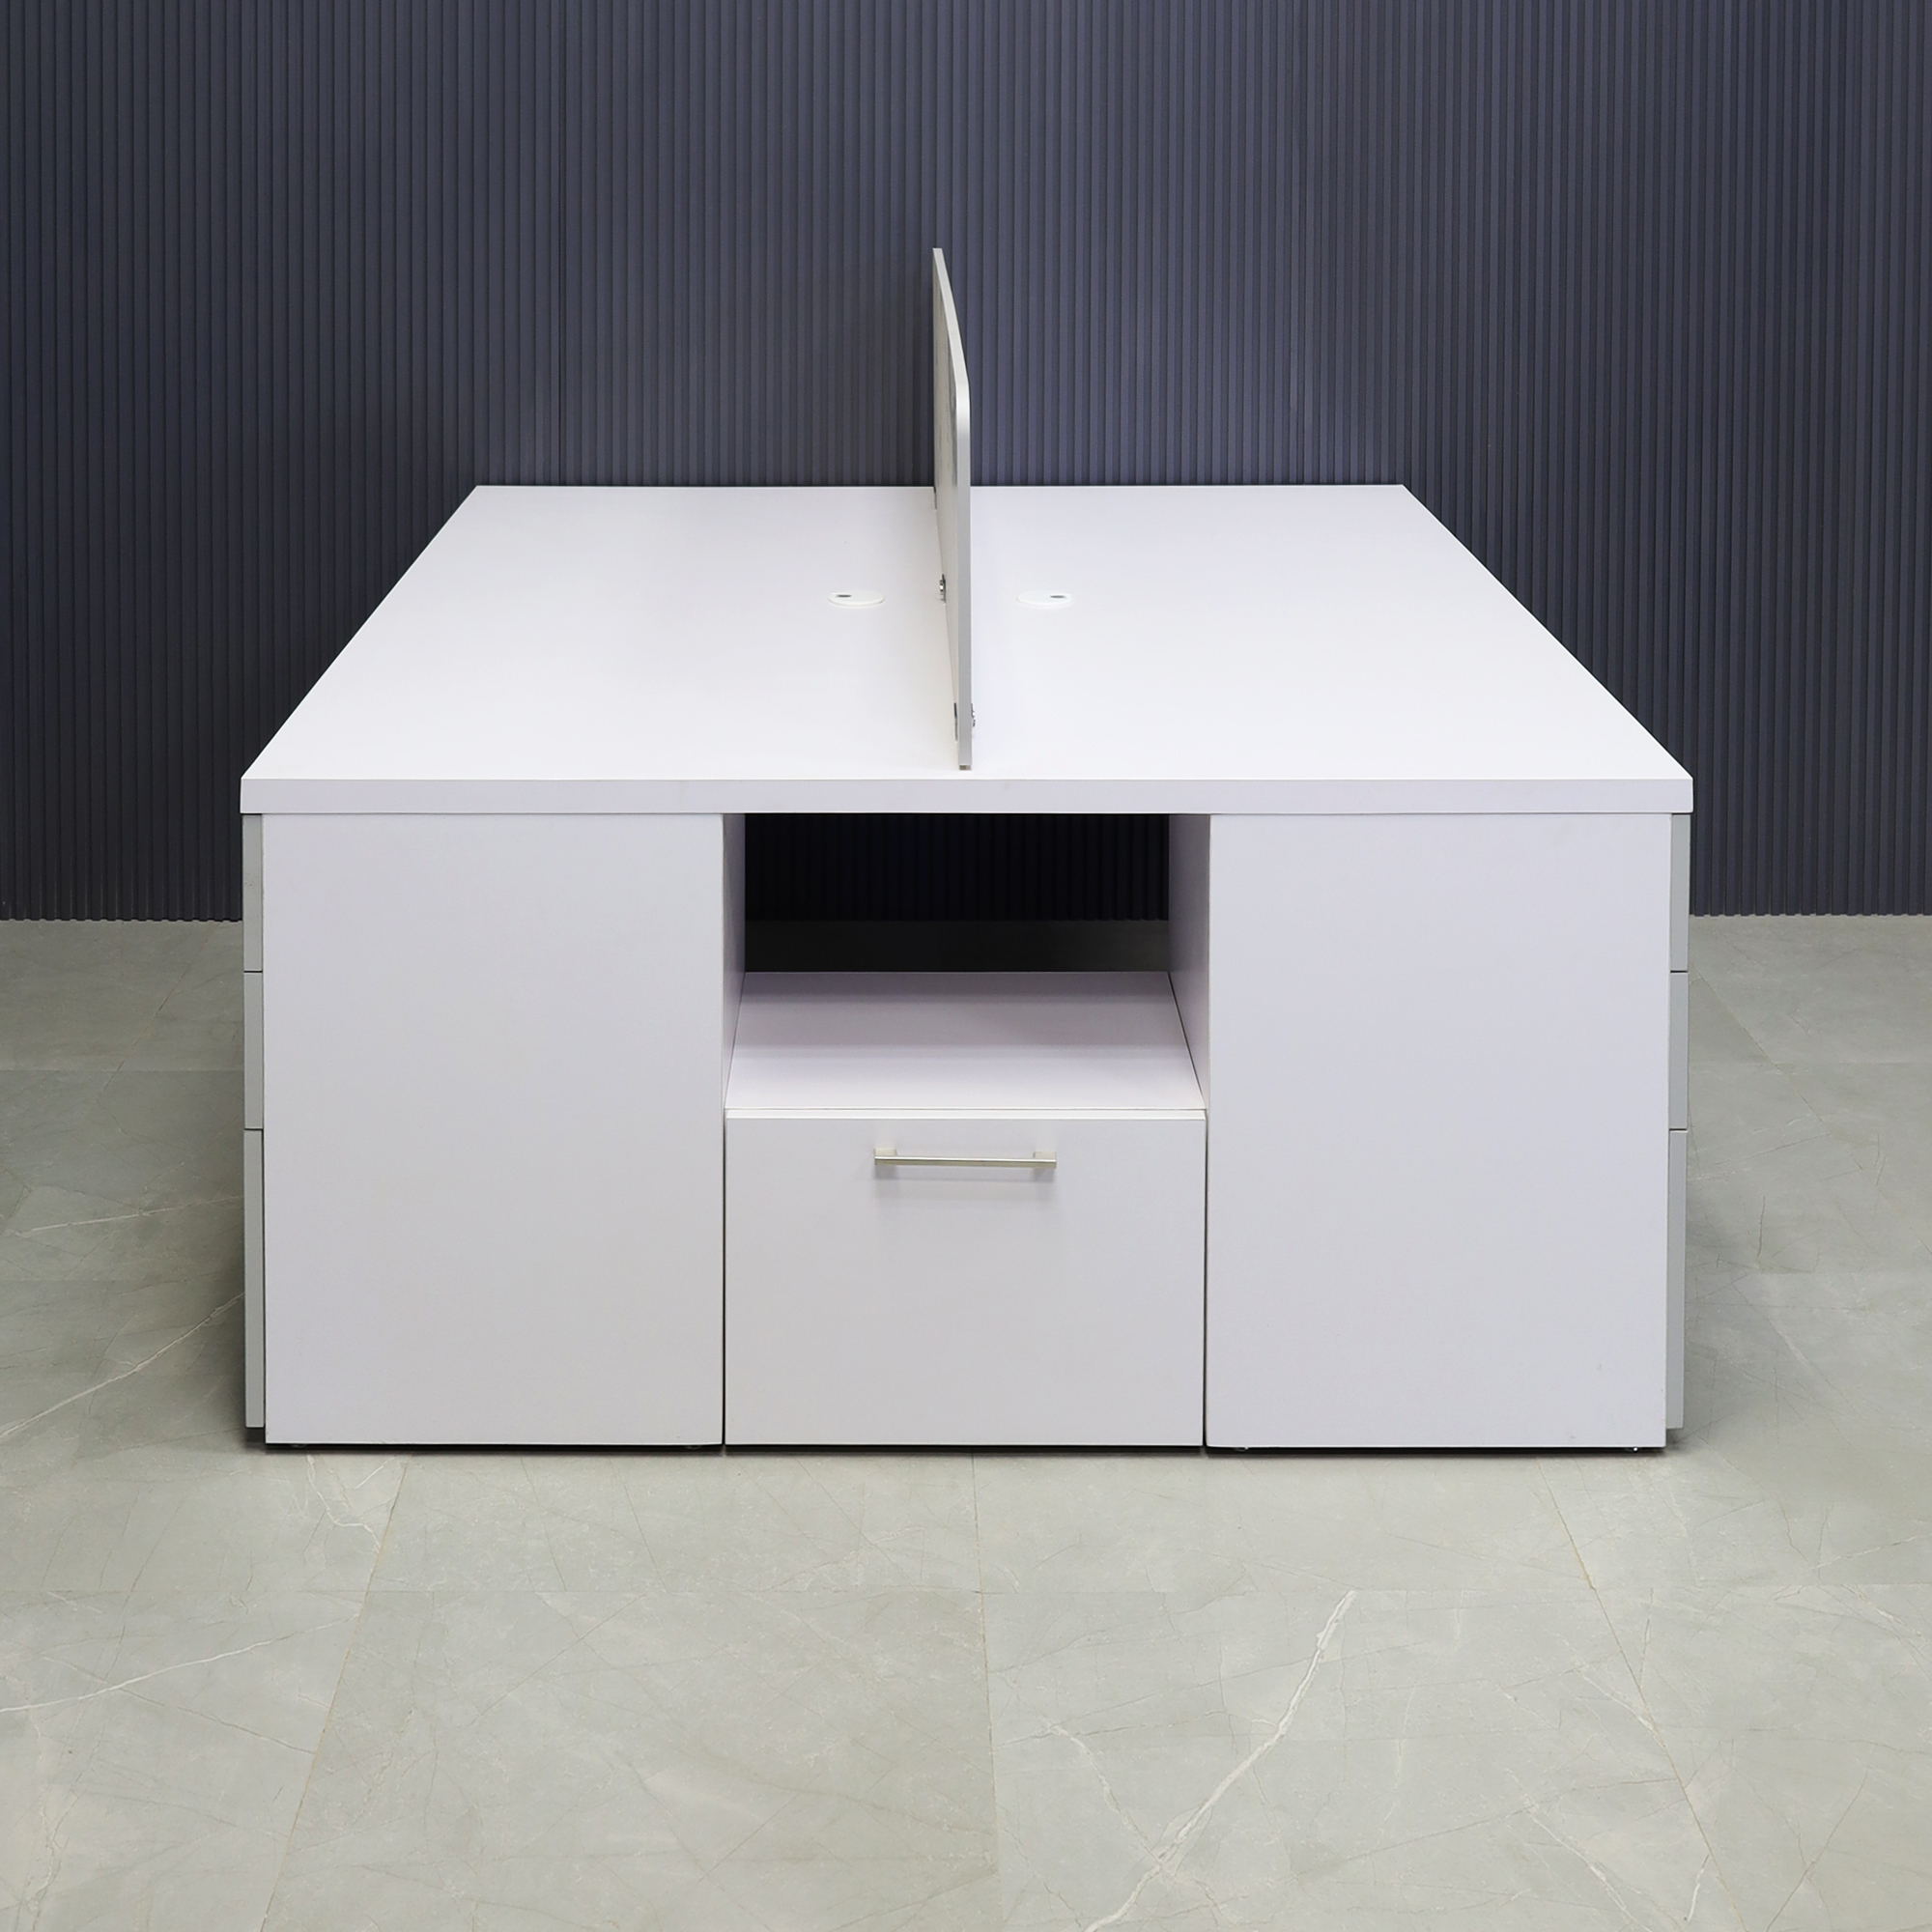 60X60 inches Dallas Workstation With Storage in white matte laminate top & storages, fog gray laminate divider & front drawers, with brushed stainless legs shown here.